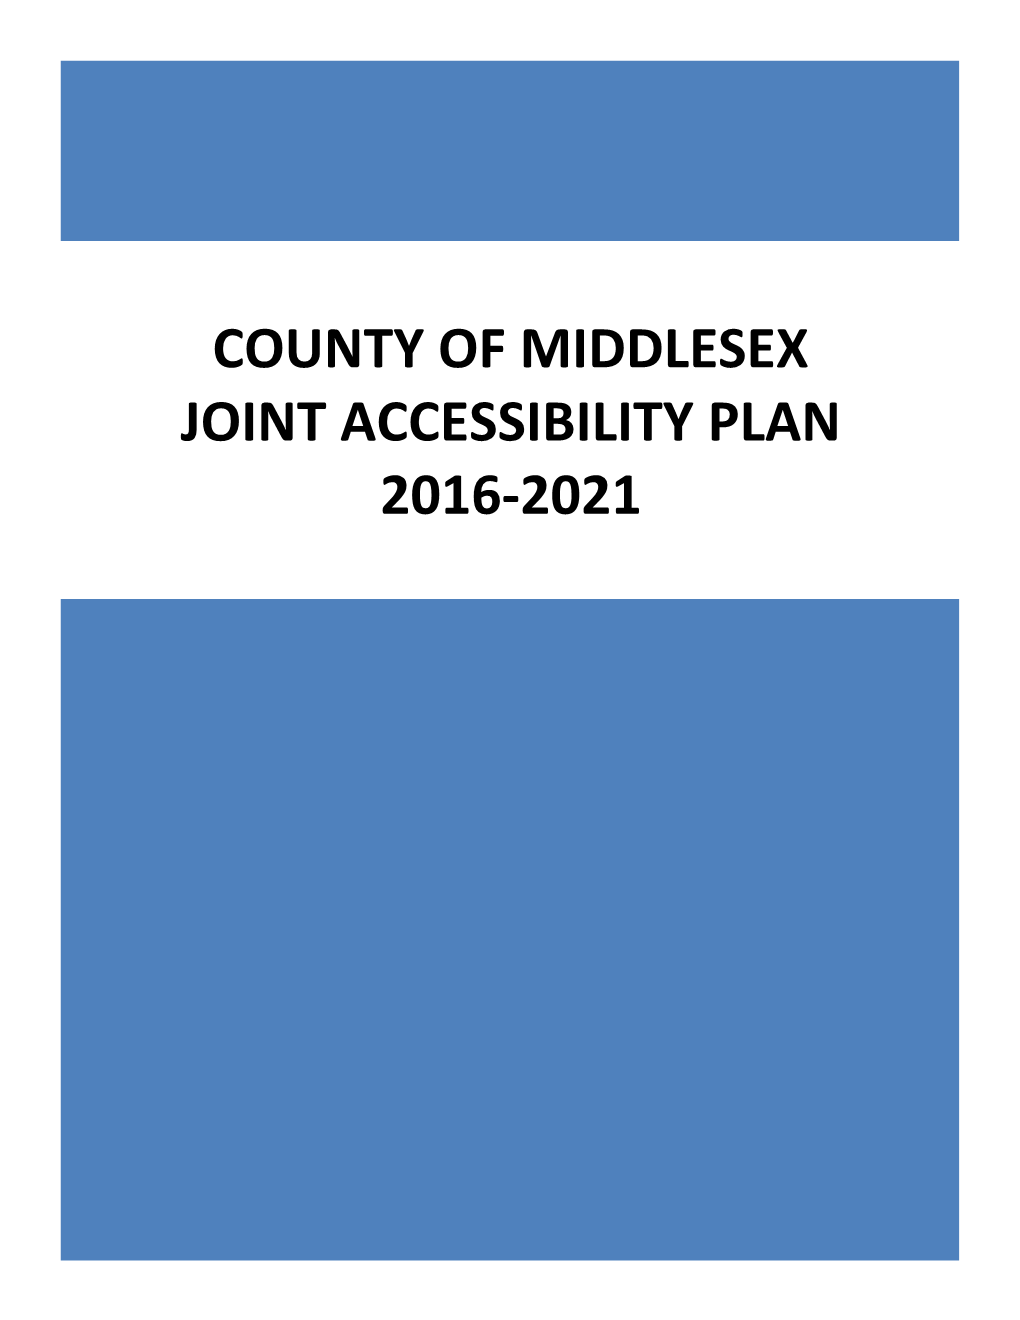 Joint Accessibility Plan with the County of Middlesex